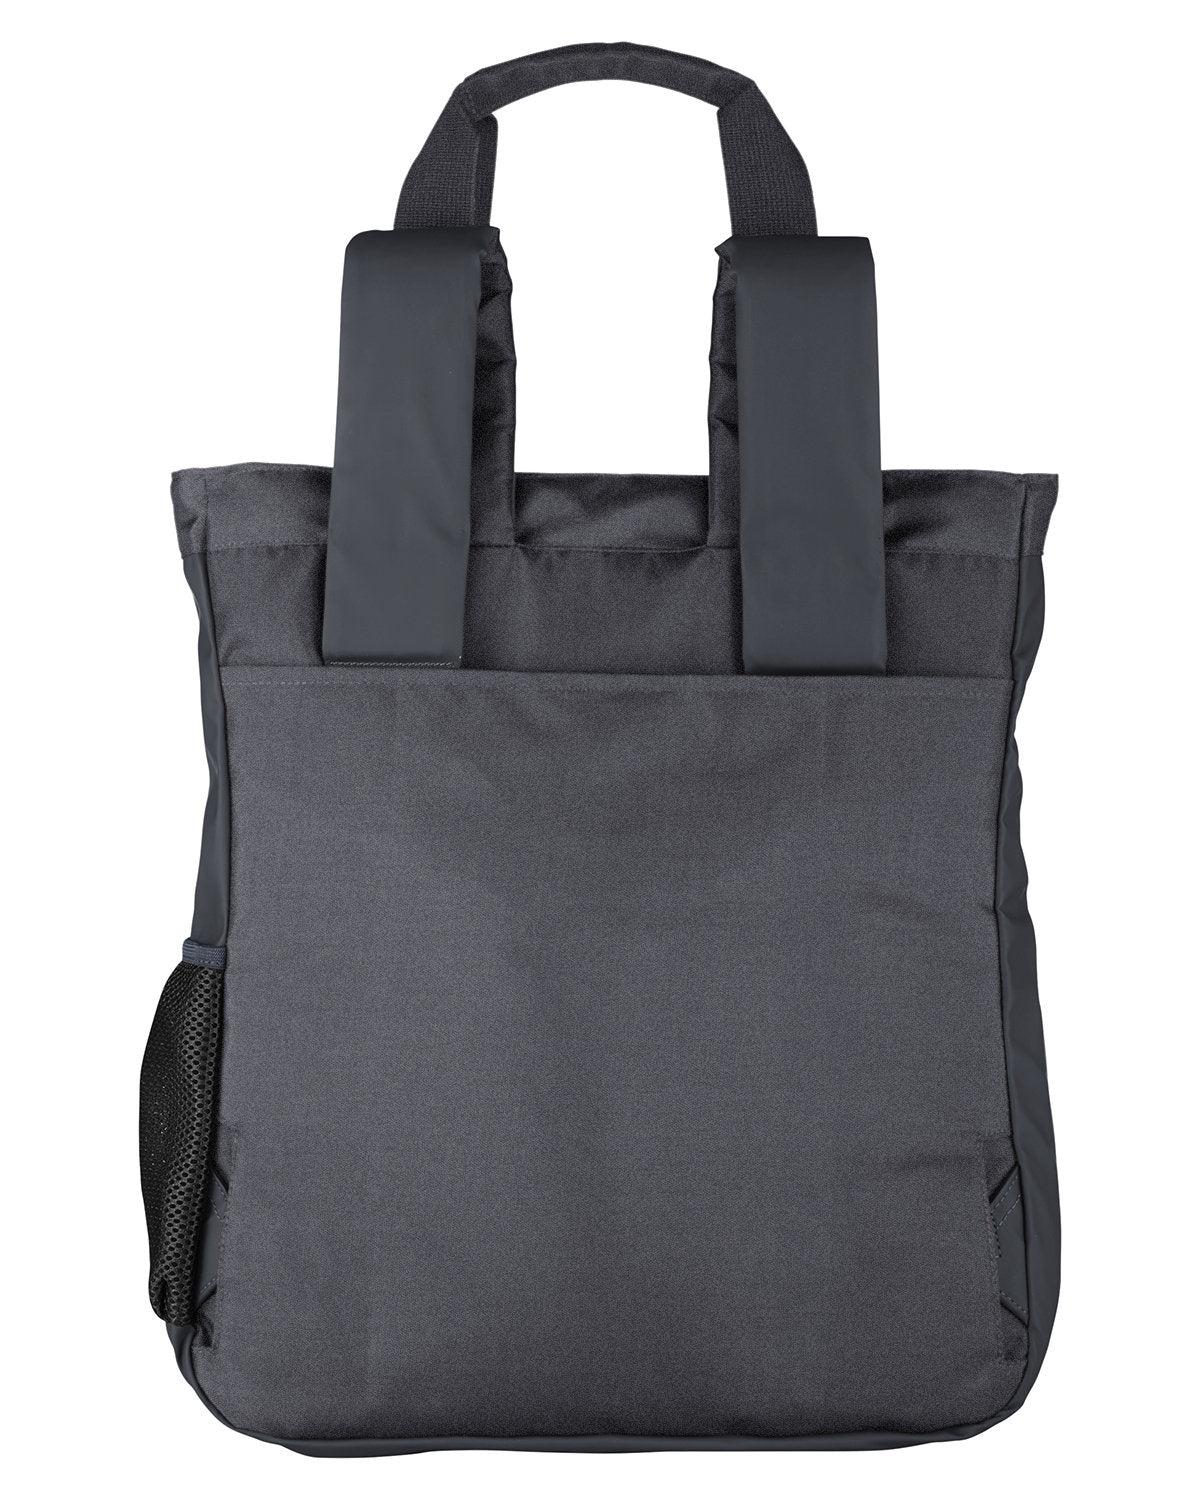 NE901-North End-CARBON-North End-Bags and Accessories-2